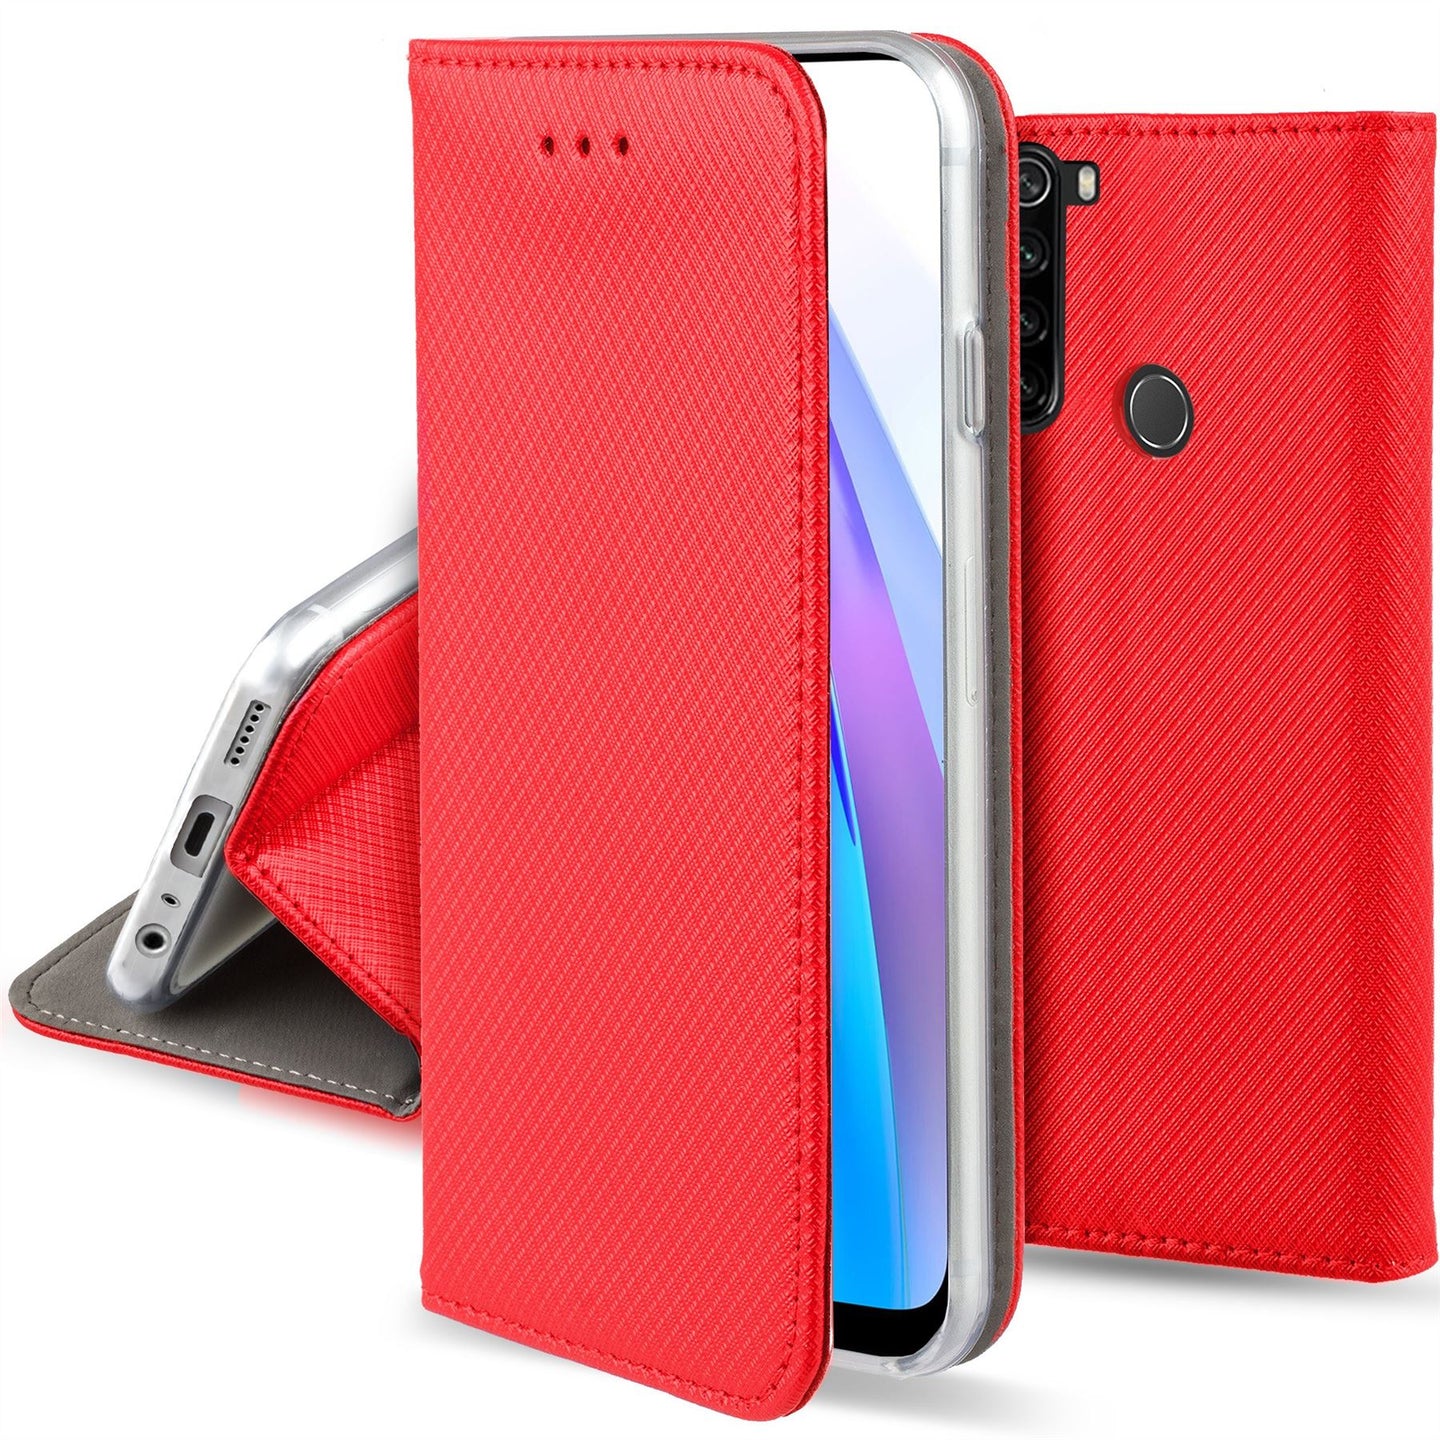 Moozy Case Flip Cover for Xiaomi Redmi Note 8T, Red - Smart Magnetic Flip Case with Card Holder and Stand